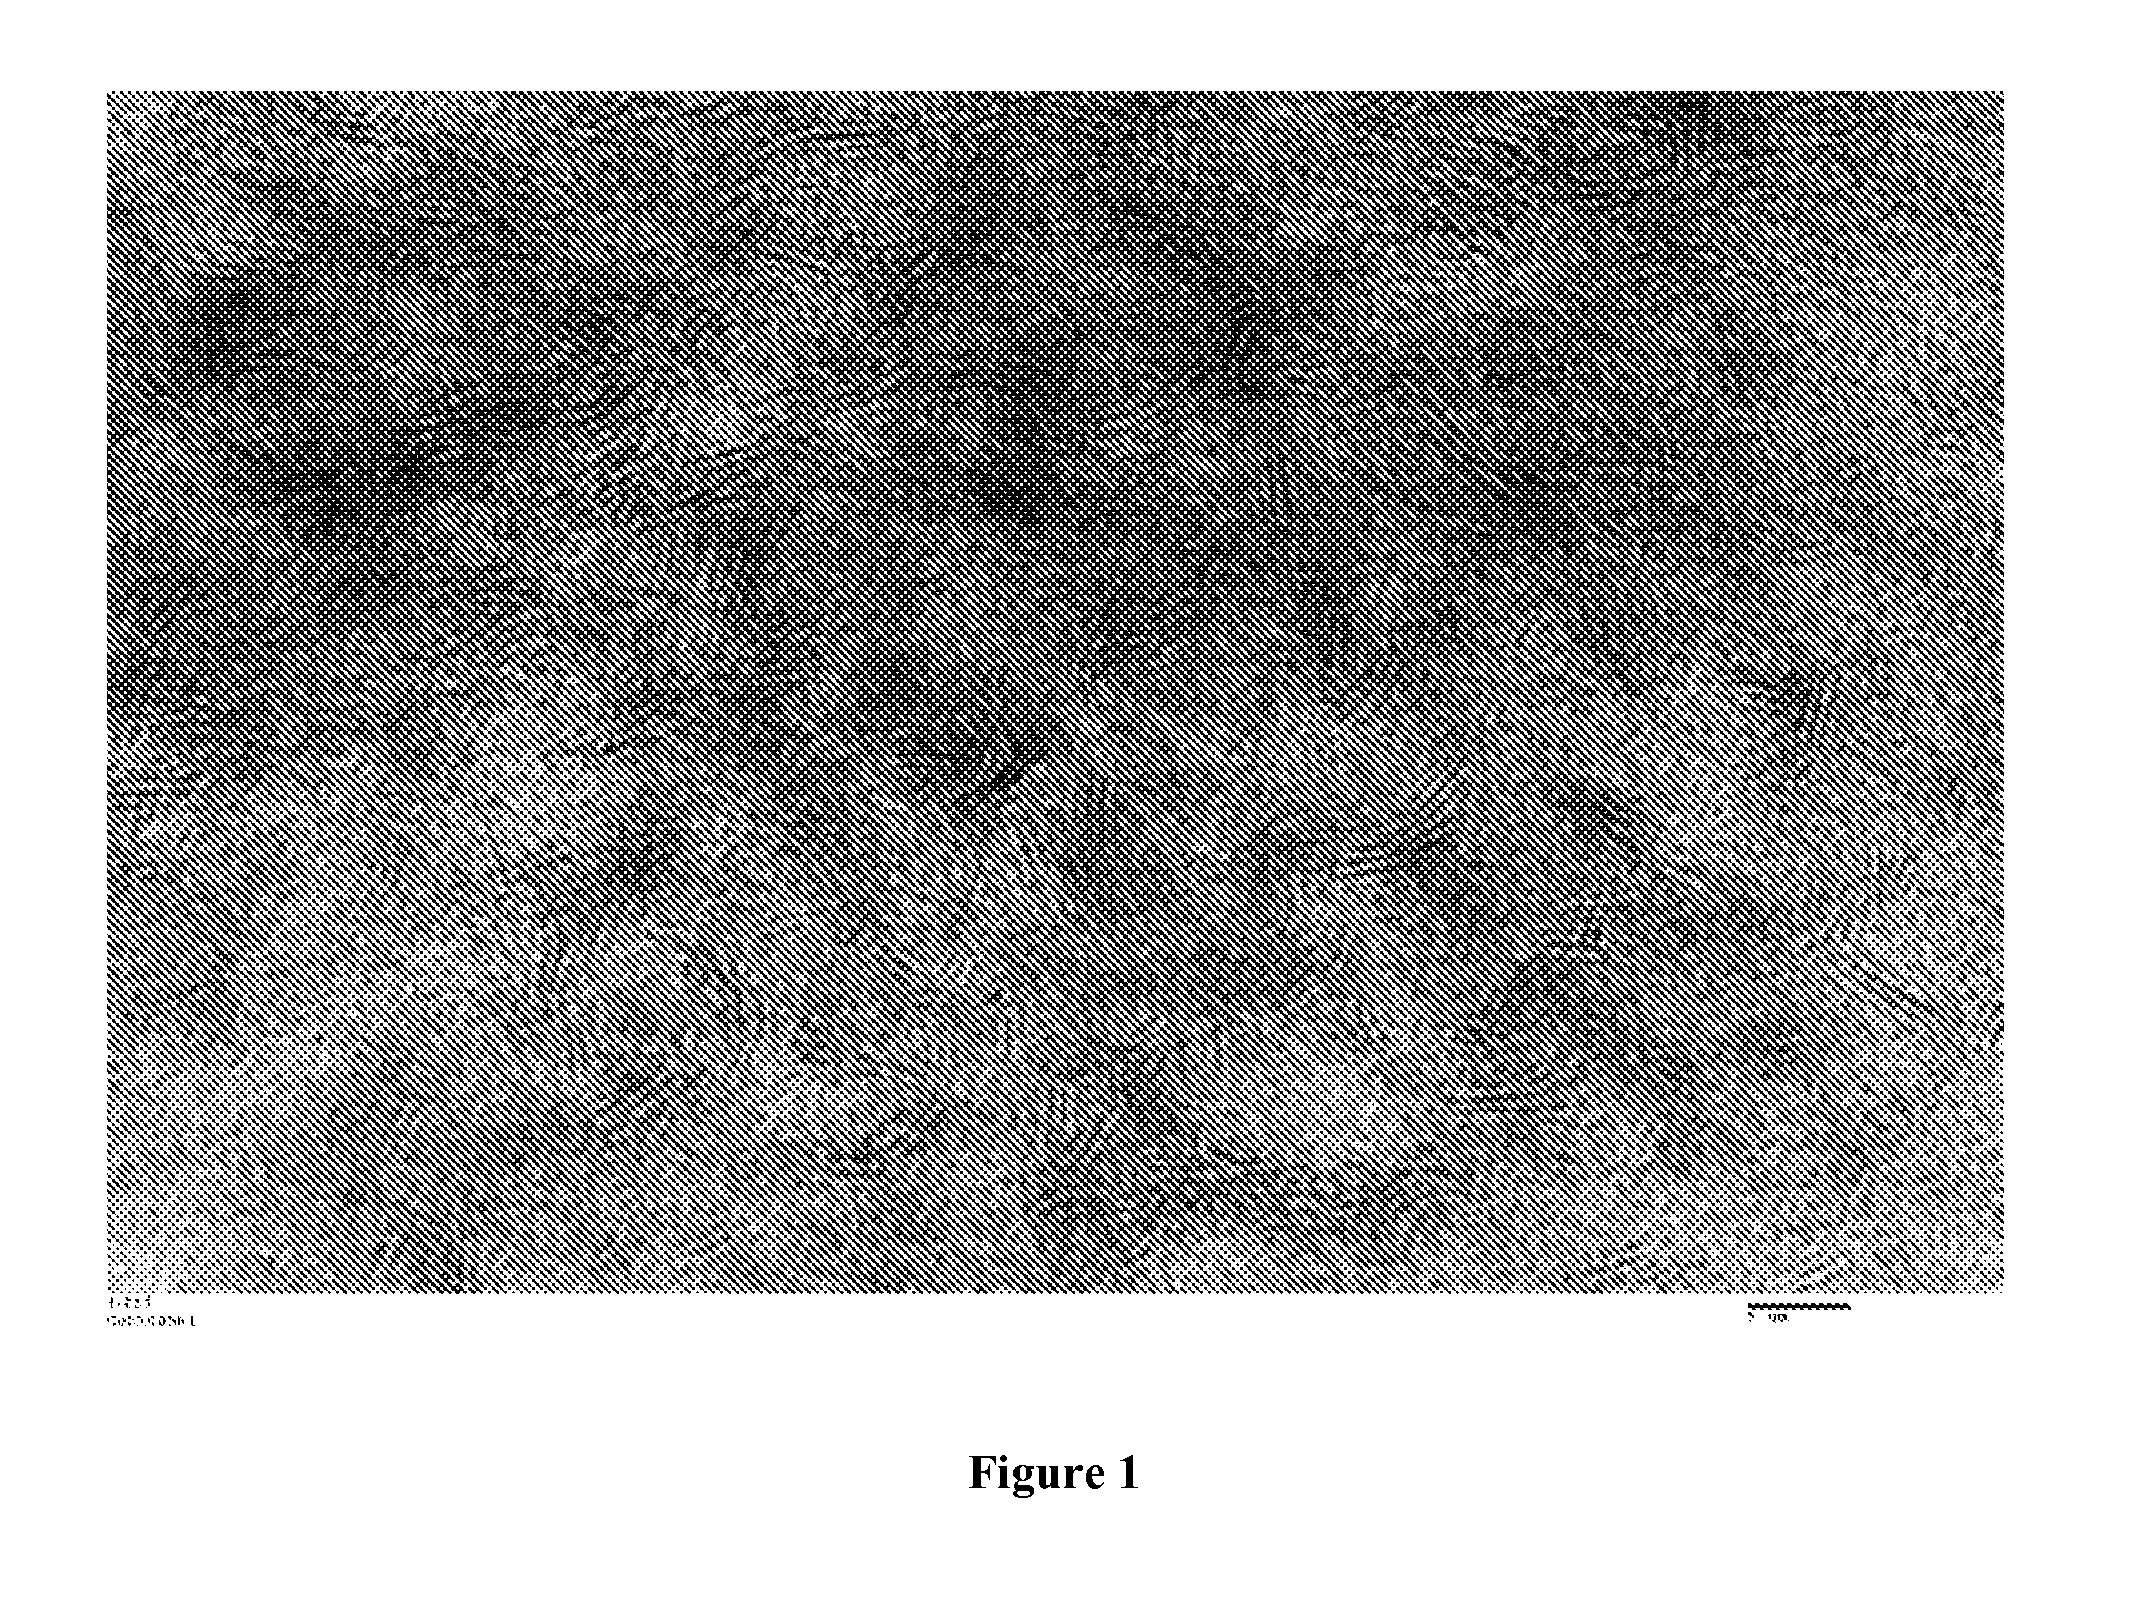 Hydrotreating catalyst and process for preparing the same